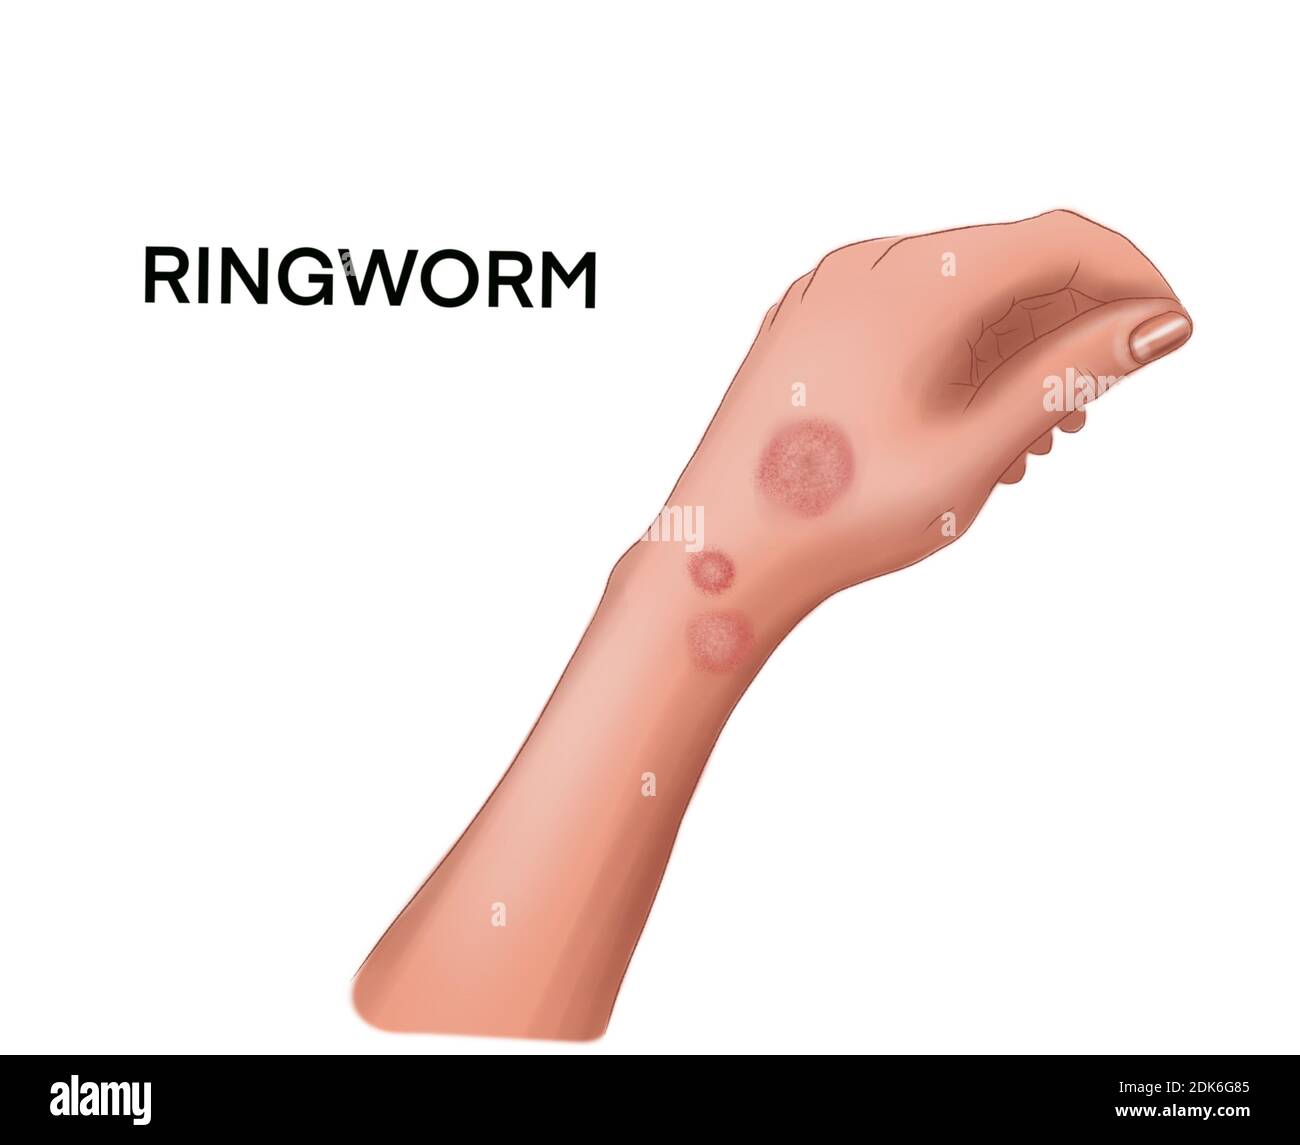 Illustration of the ringworm on the hand Stock Photo